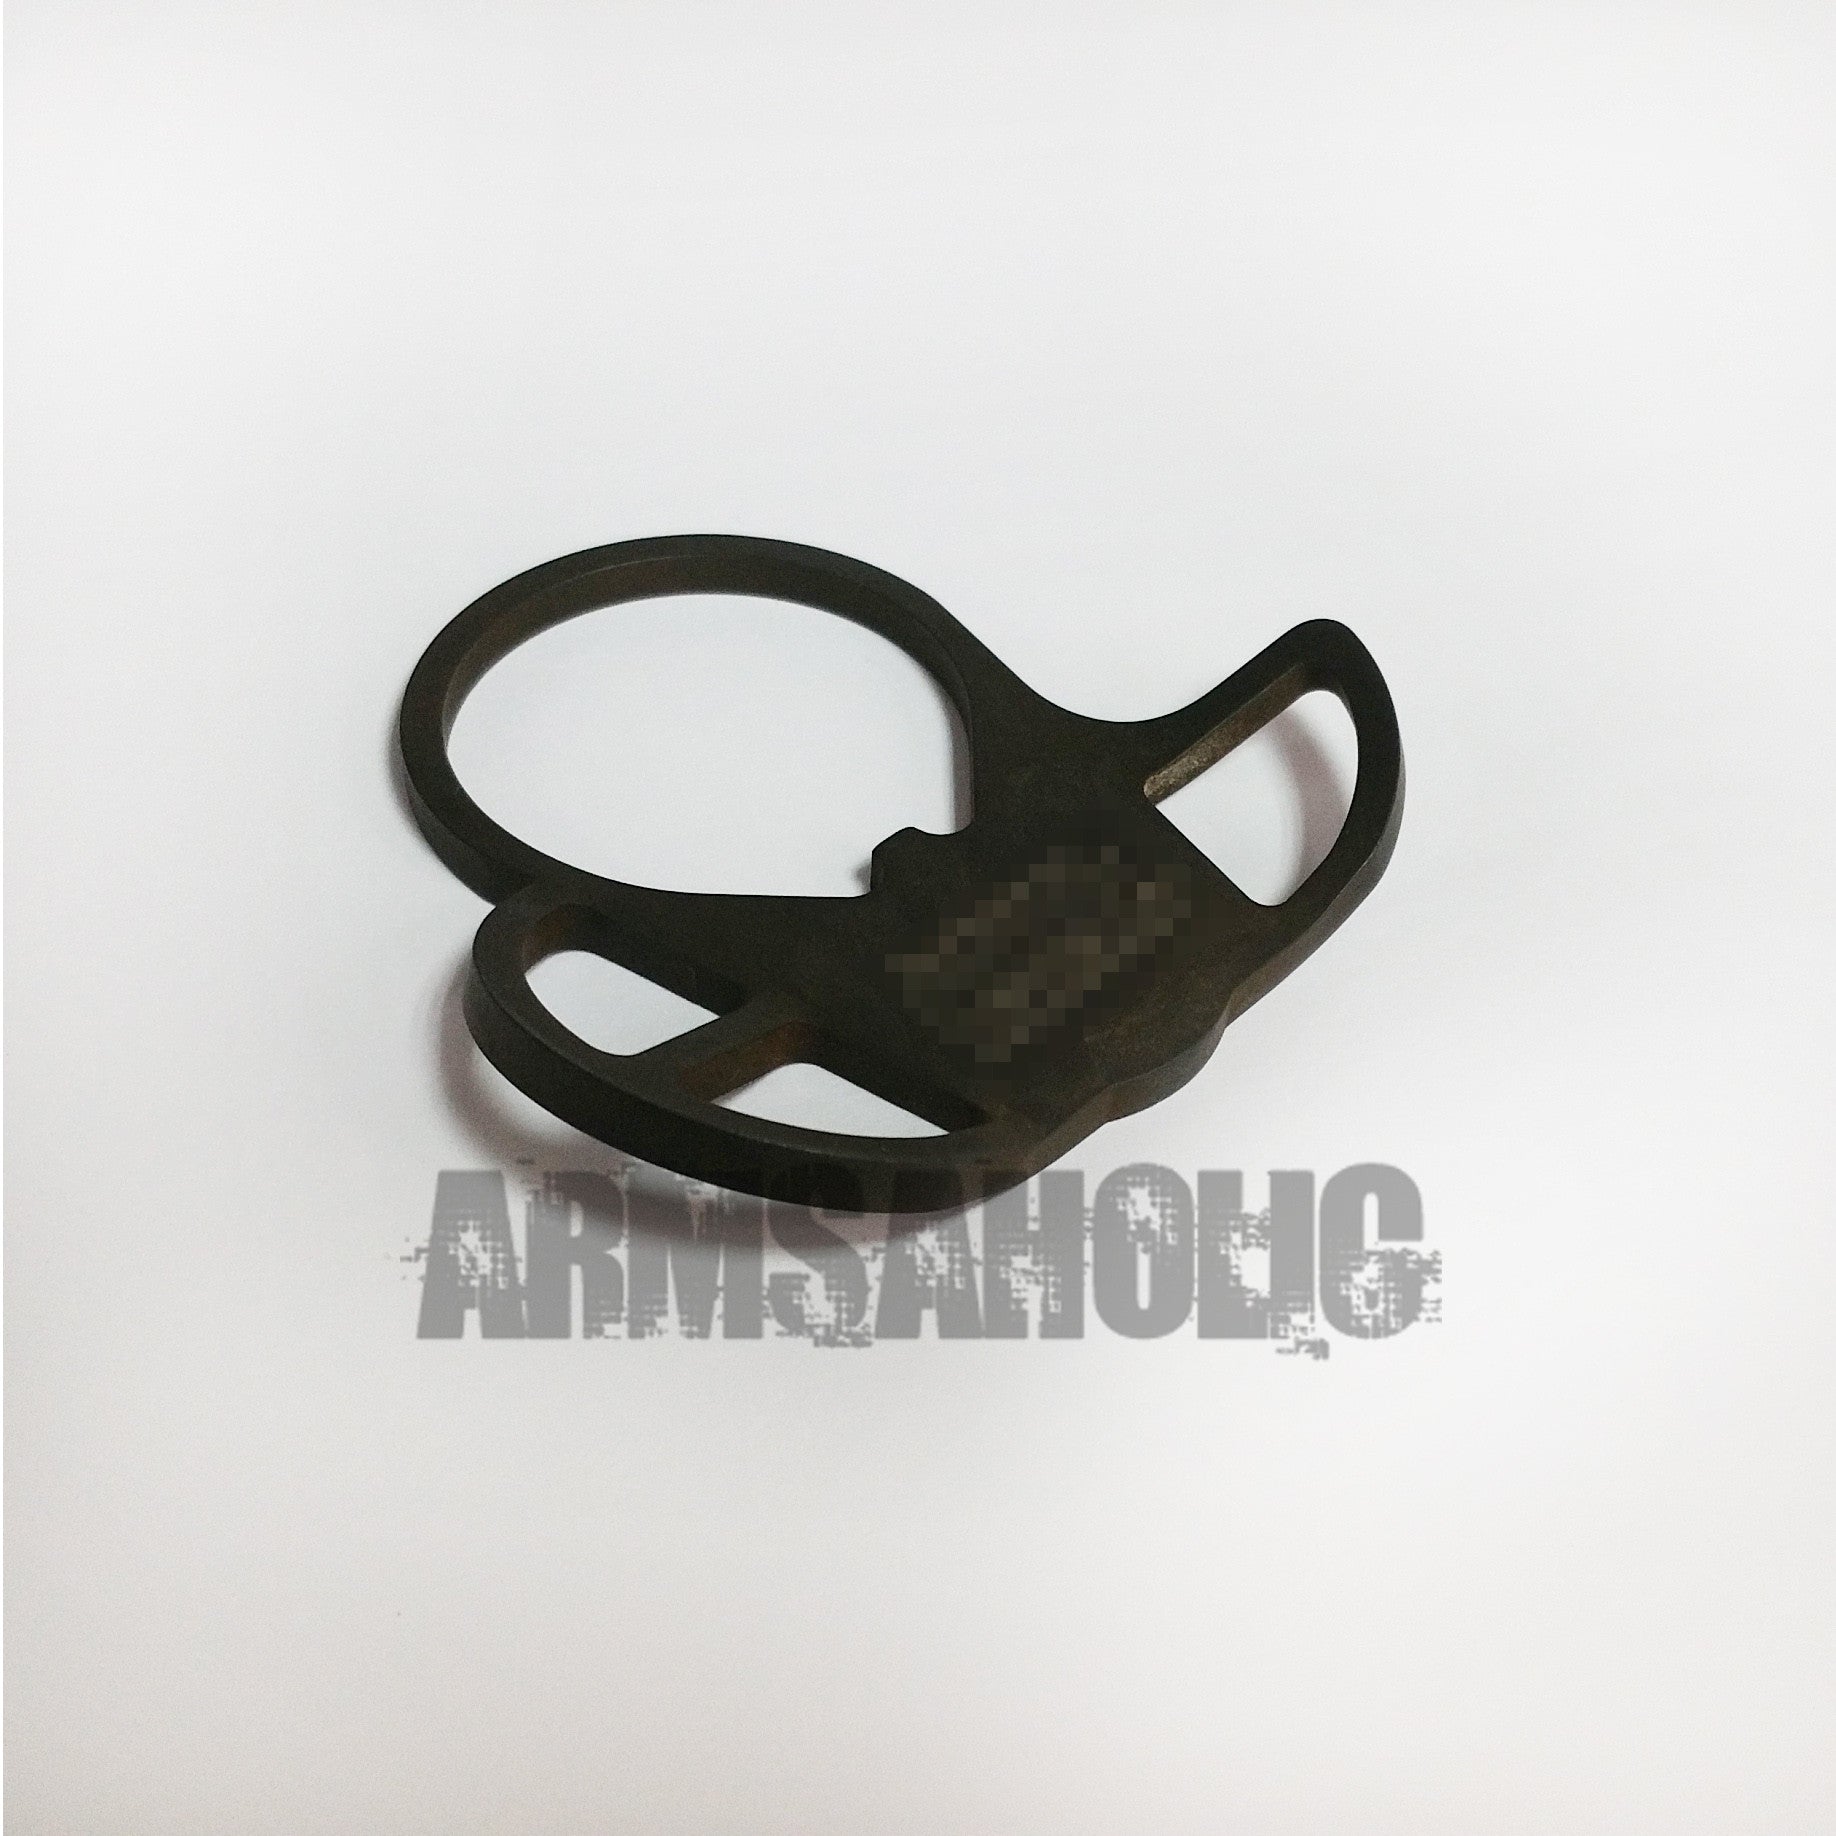 CQD Style Dual Loop Sling Plate Mount Adapter for Tactical Airsoft